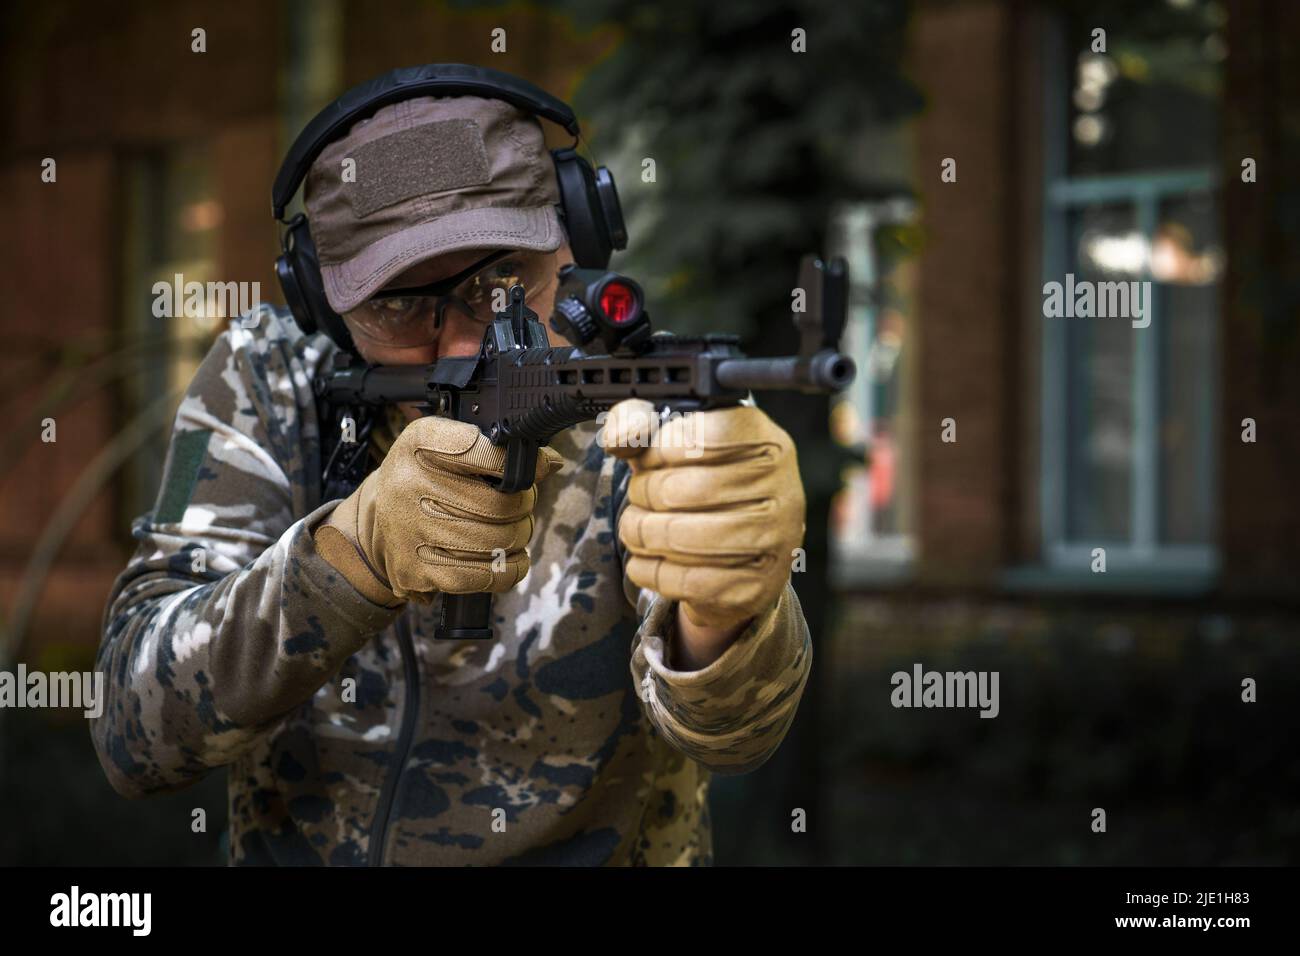 Tactical training course young man. Outdoor shooting range. Shotgun weapon action course. Private military contractor at tactical training course. Shooter with a gun in military uniform. Stock Photo